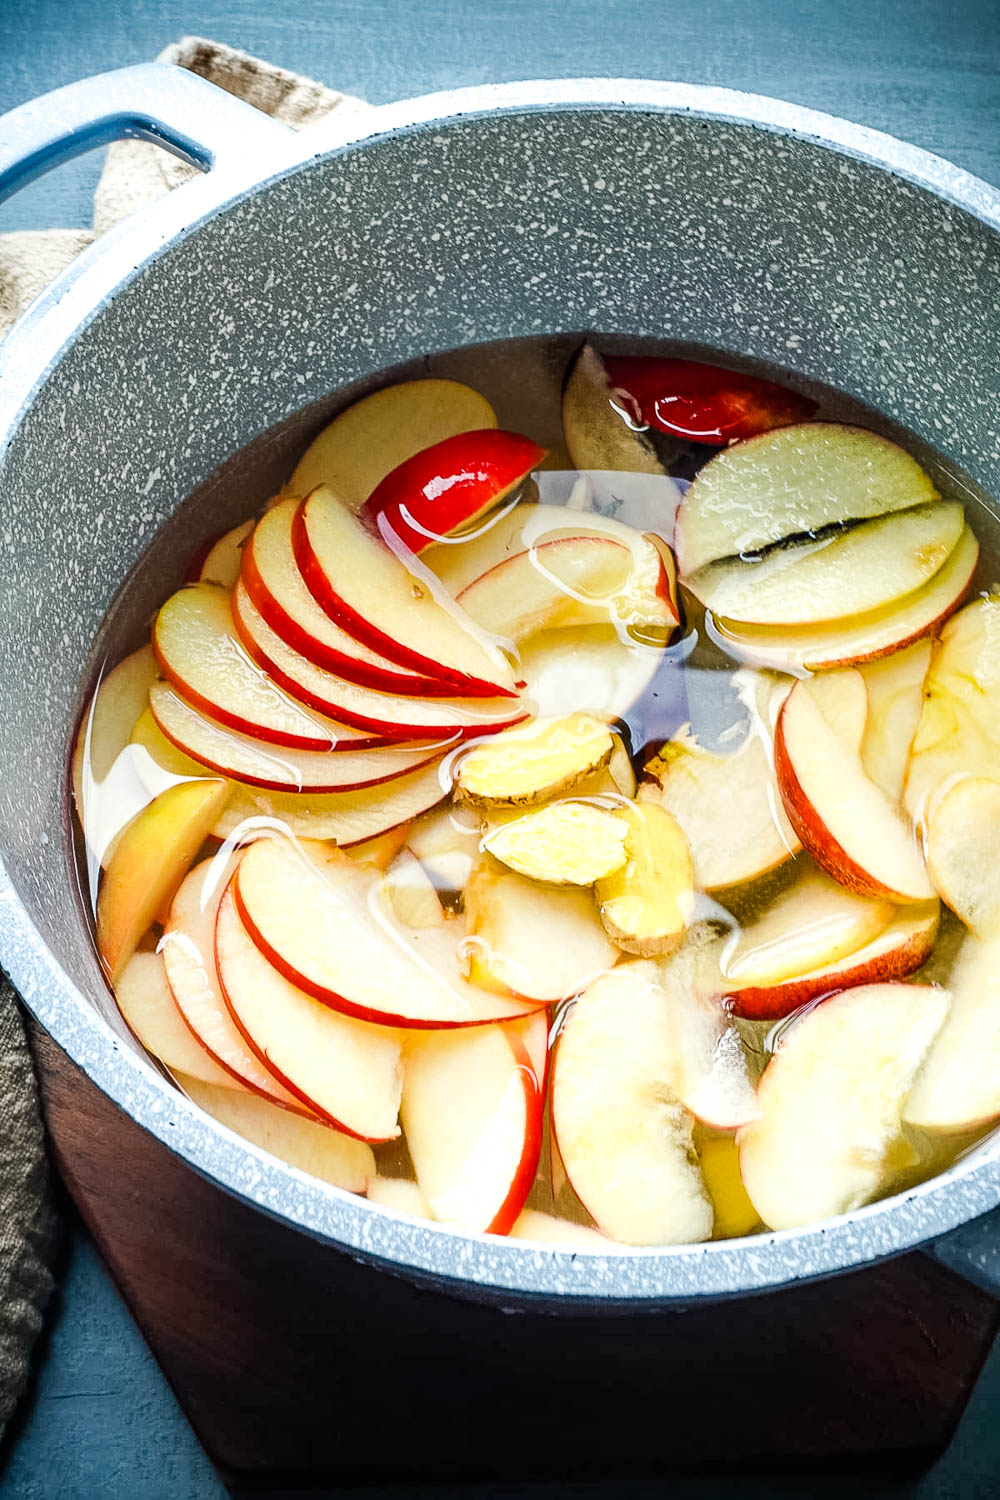 All od the ingredients of this Apple Cinnamon Tea recipe in a pot ready to simmer on the stove top.